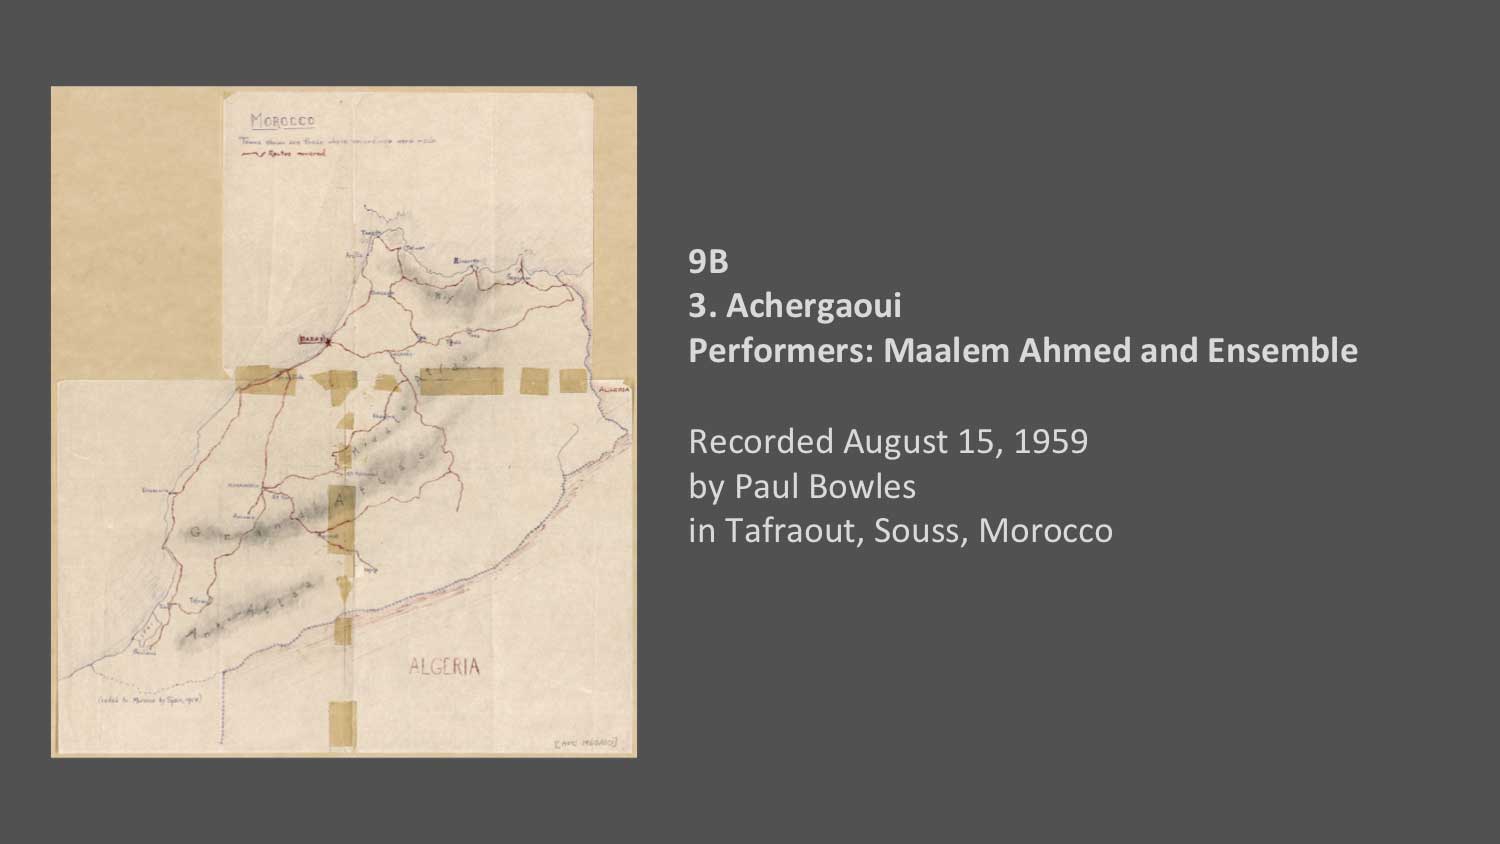 9B
3. "Achergaoui" by Maalem Ahmed and Ensemble 
Recorded by Paul Bowles on August 15, 1959 in Tafraout, Souss, Morocco